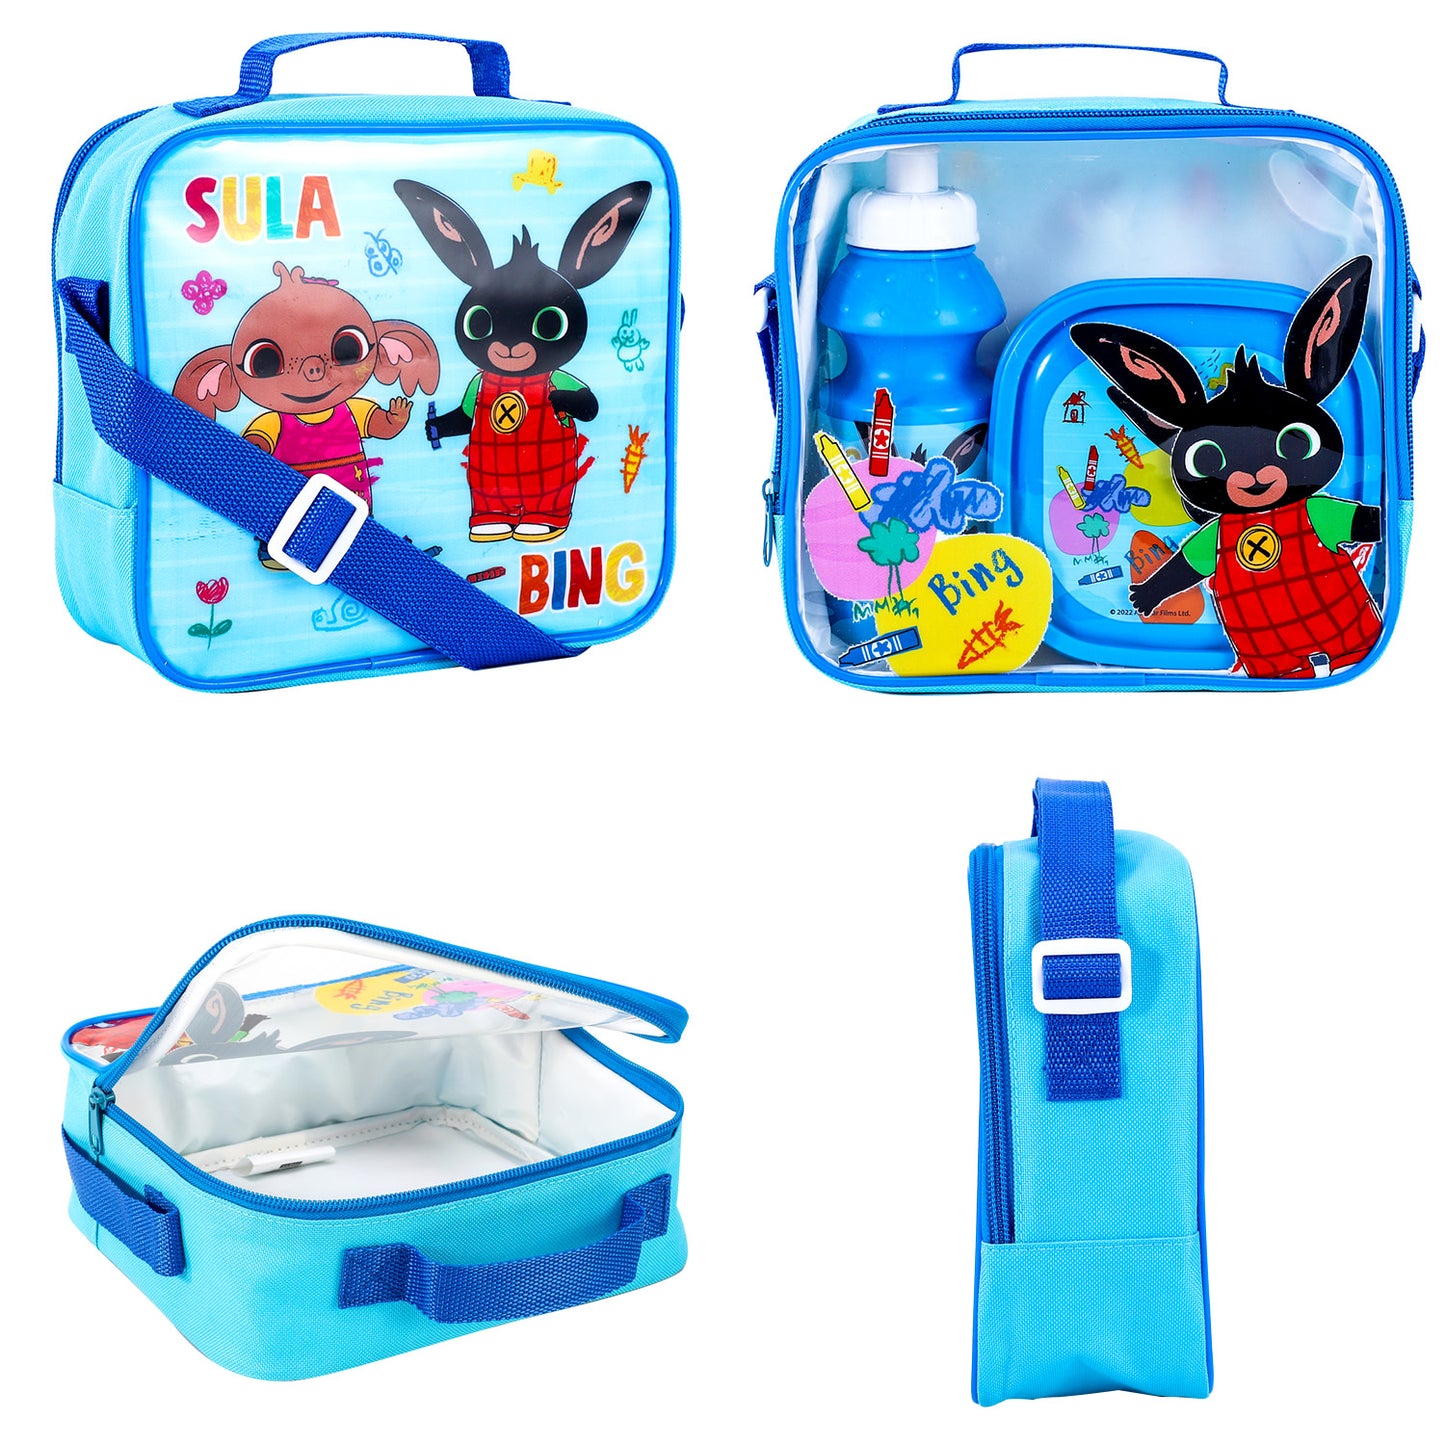 Bing 3Pc Lunch Set, Lunch Bag, Plastic Bottle, Storage Container School Day